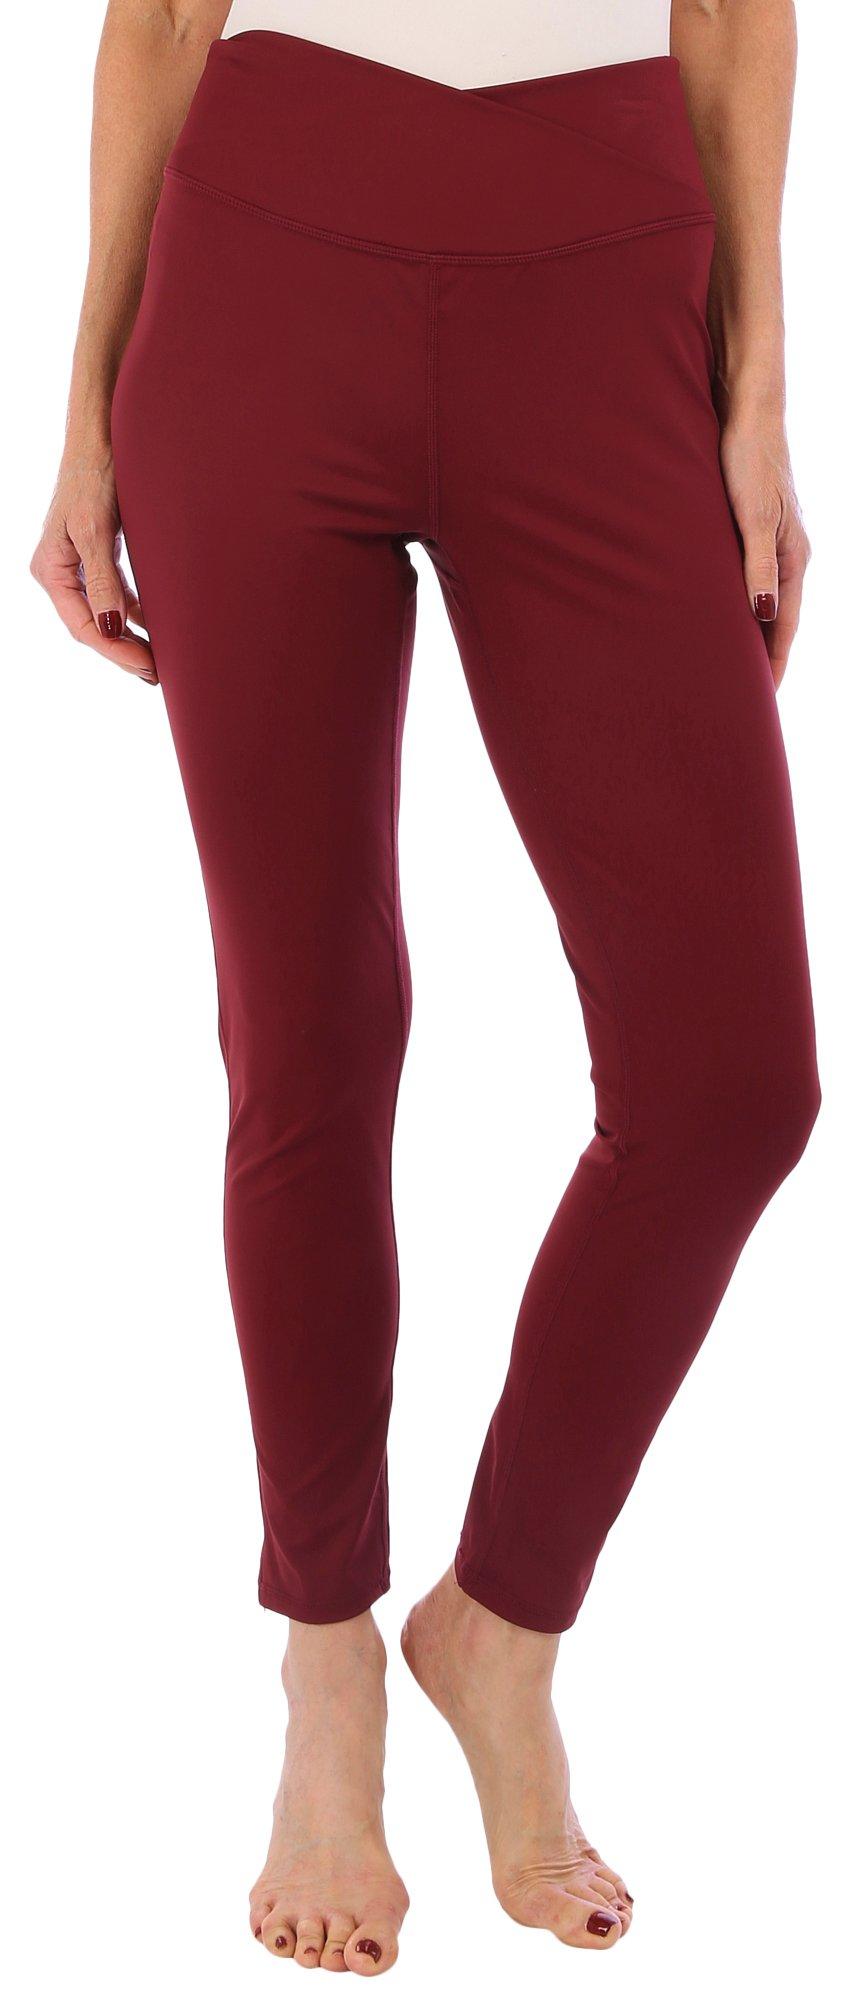 Buy Averno Women Maroon Cotton Lycra Ankle-length Stretchable